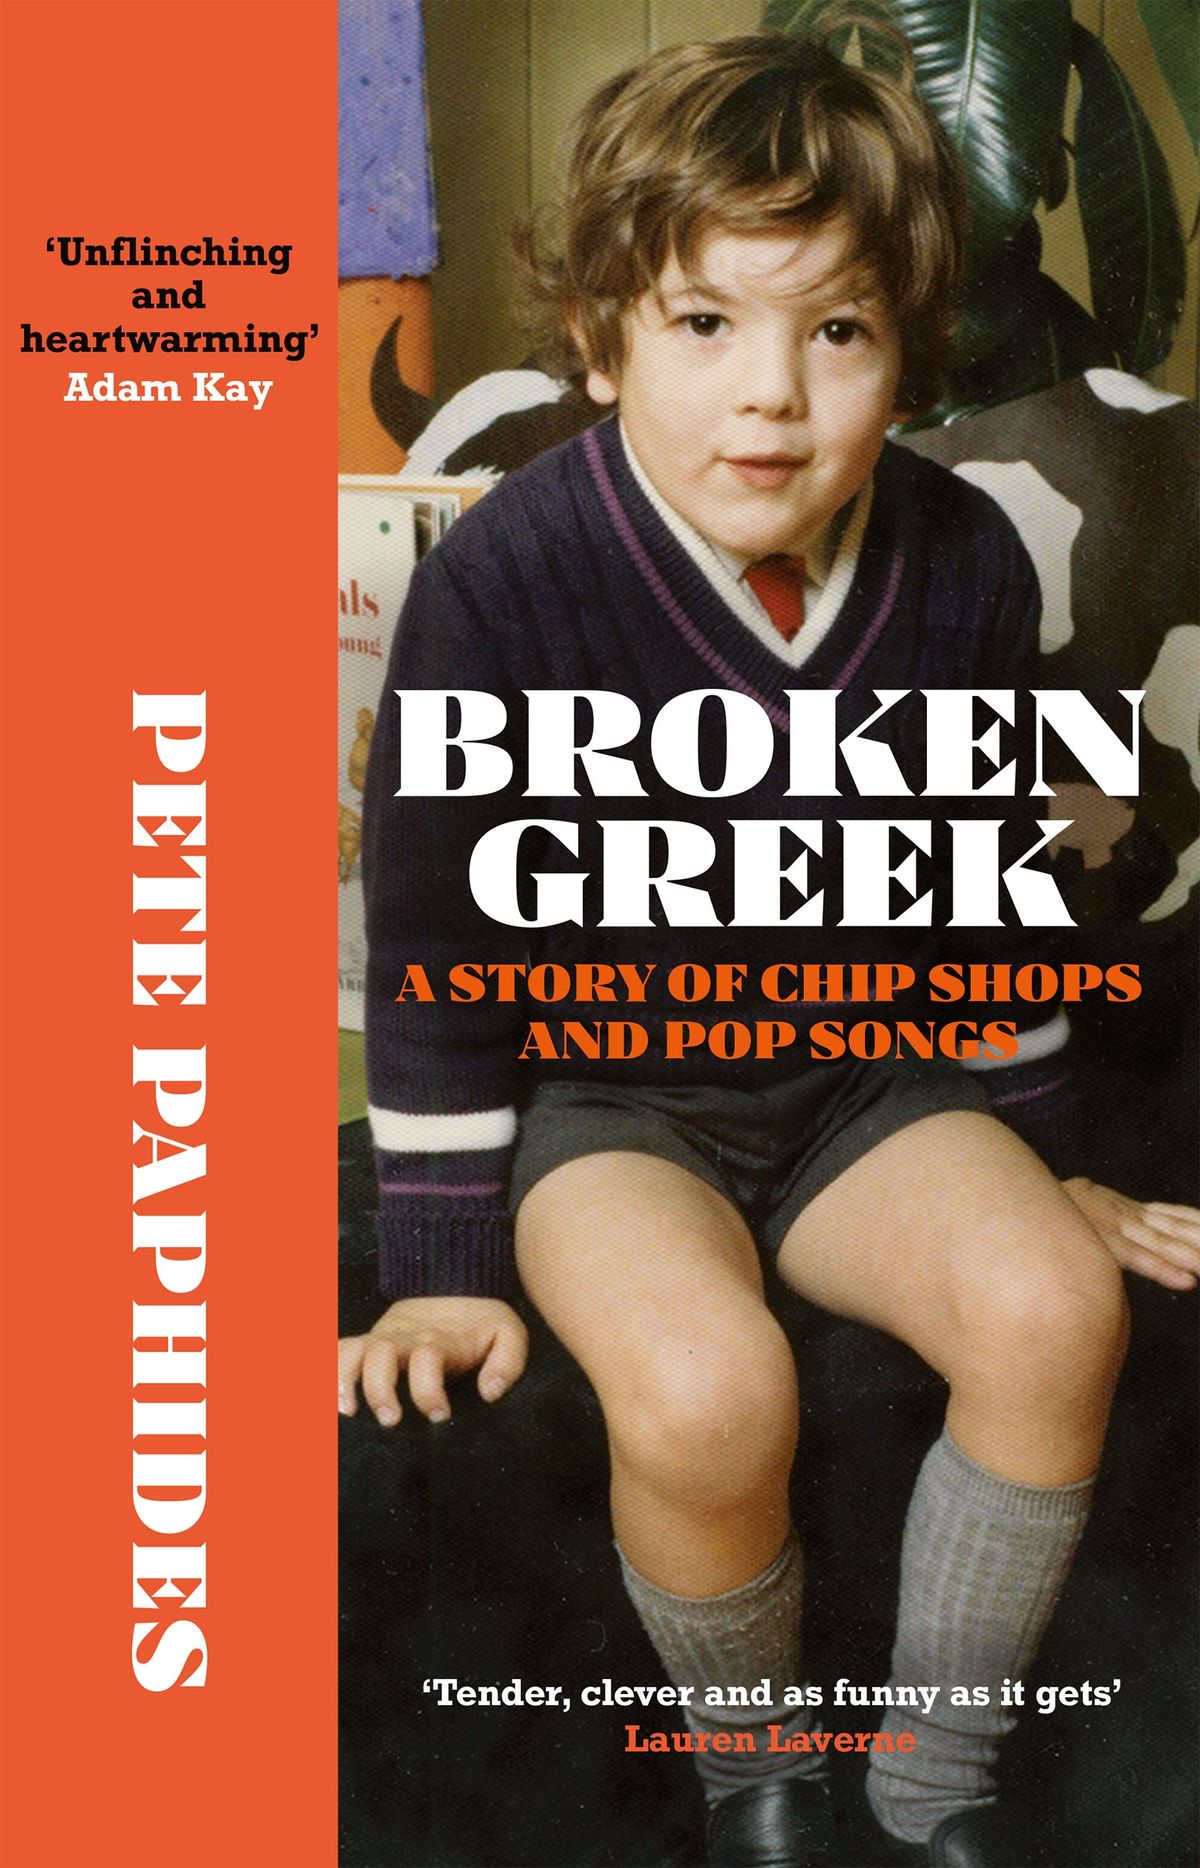 Broken Greek - a story of chip shops and pop songs